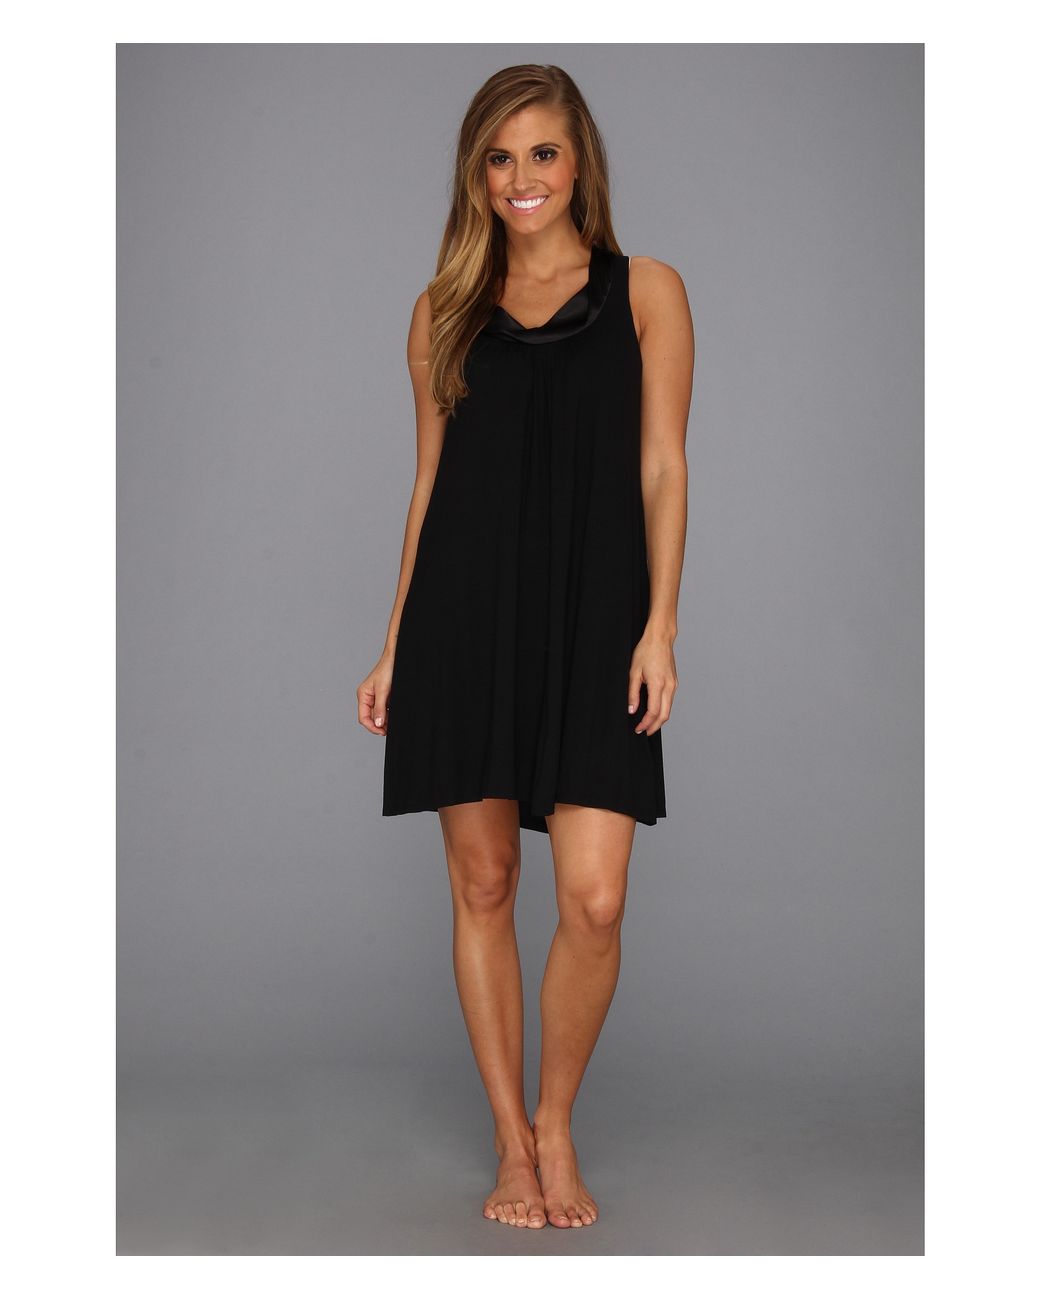 Carole Hochman Midnight By Forever and Always Chemise in Black